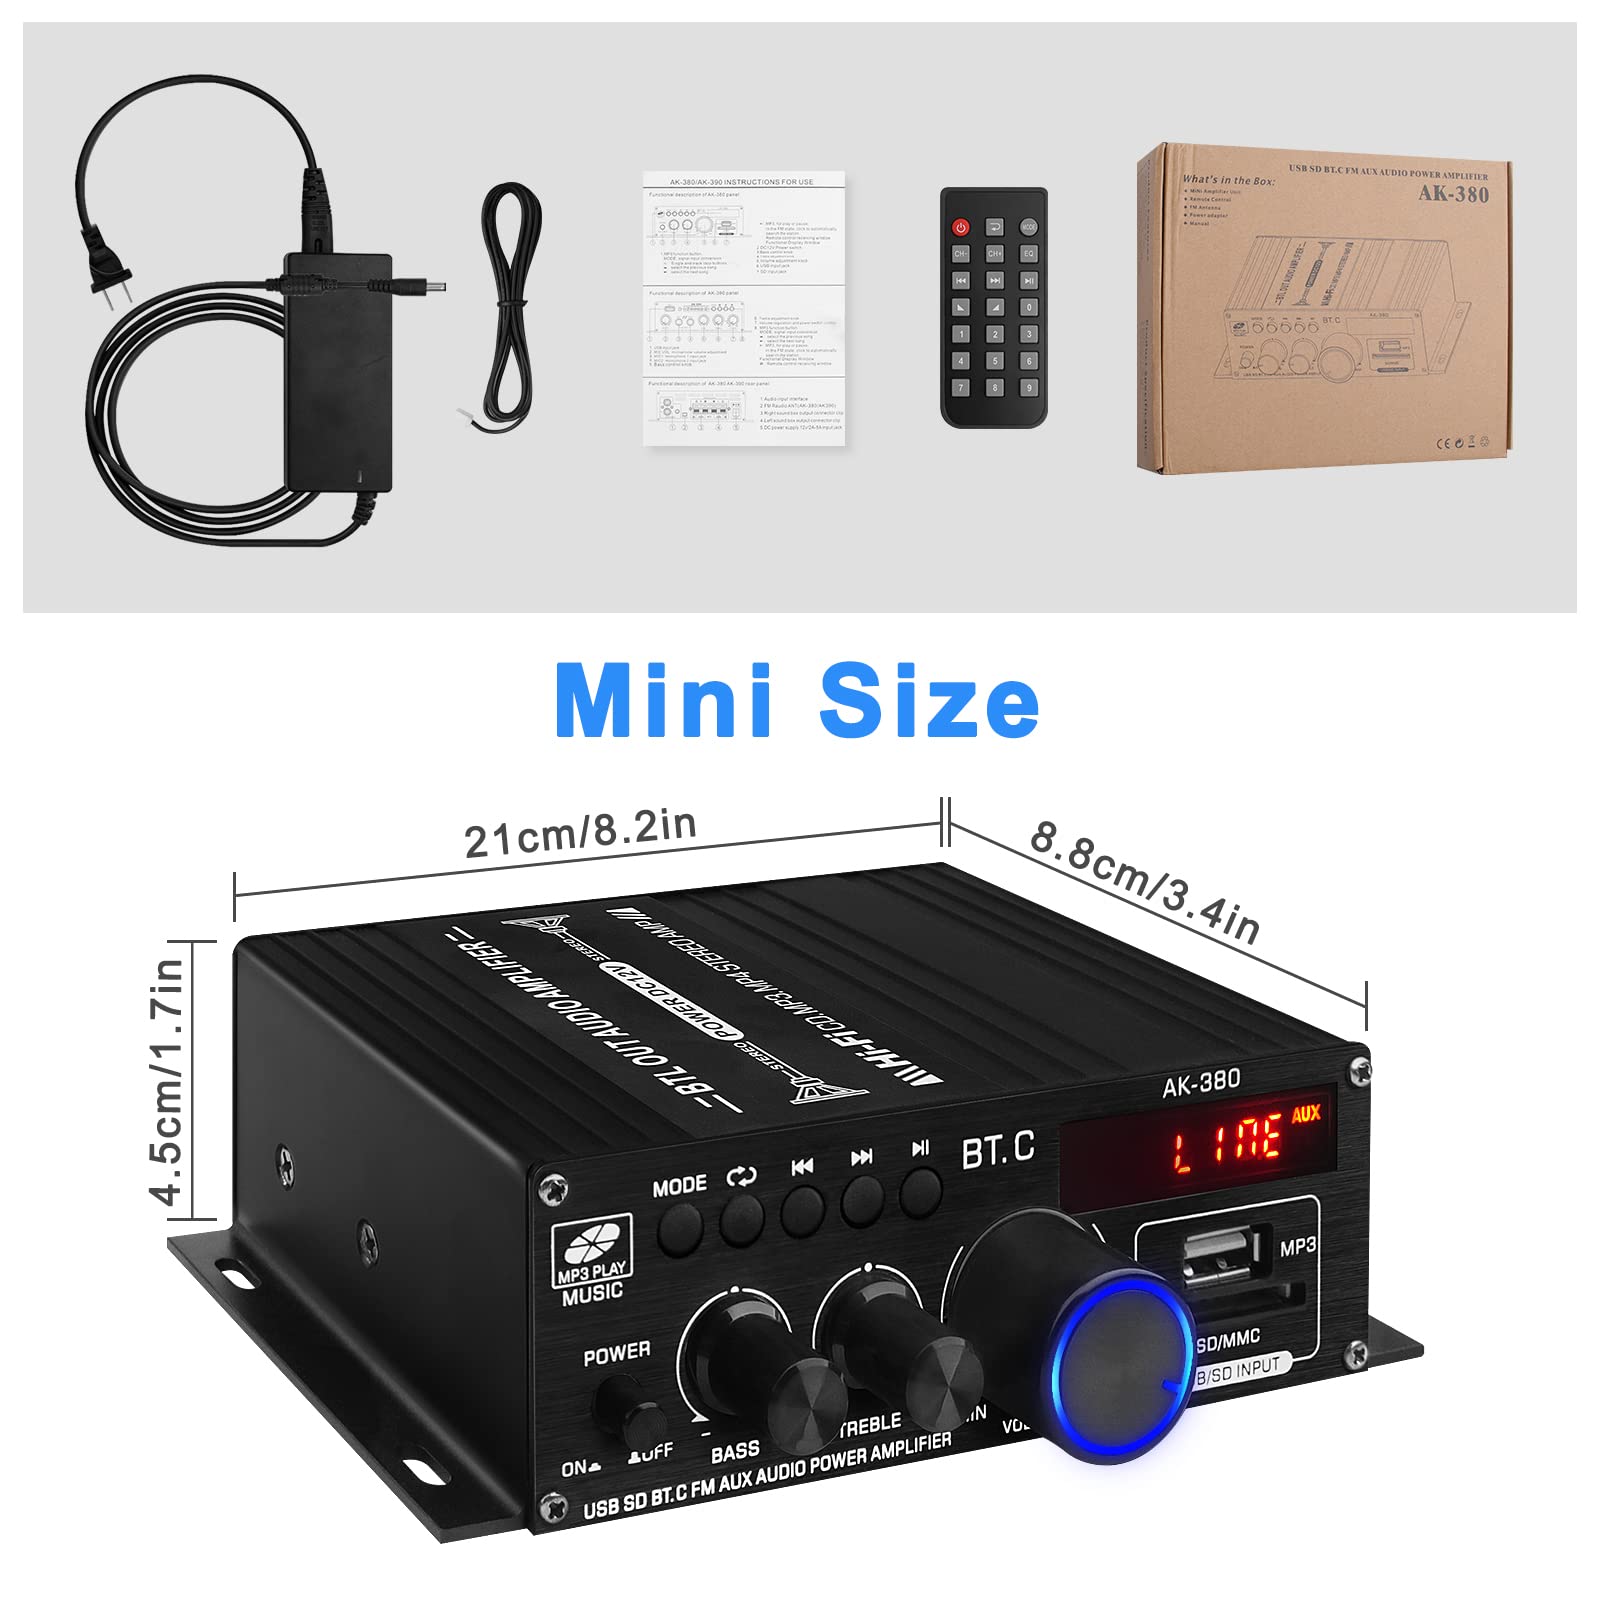 AK-380 USB SD BT.C FM AUX Audio Power Amplifier 400W+400W 2.0 CH HiFi Stereo AMP Speaker Bluetooth 5.0 Amp Receiver with 12V 5A Power Supply,Remote Control,FM Antenna for Car Home Bar Party